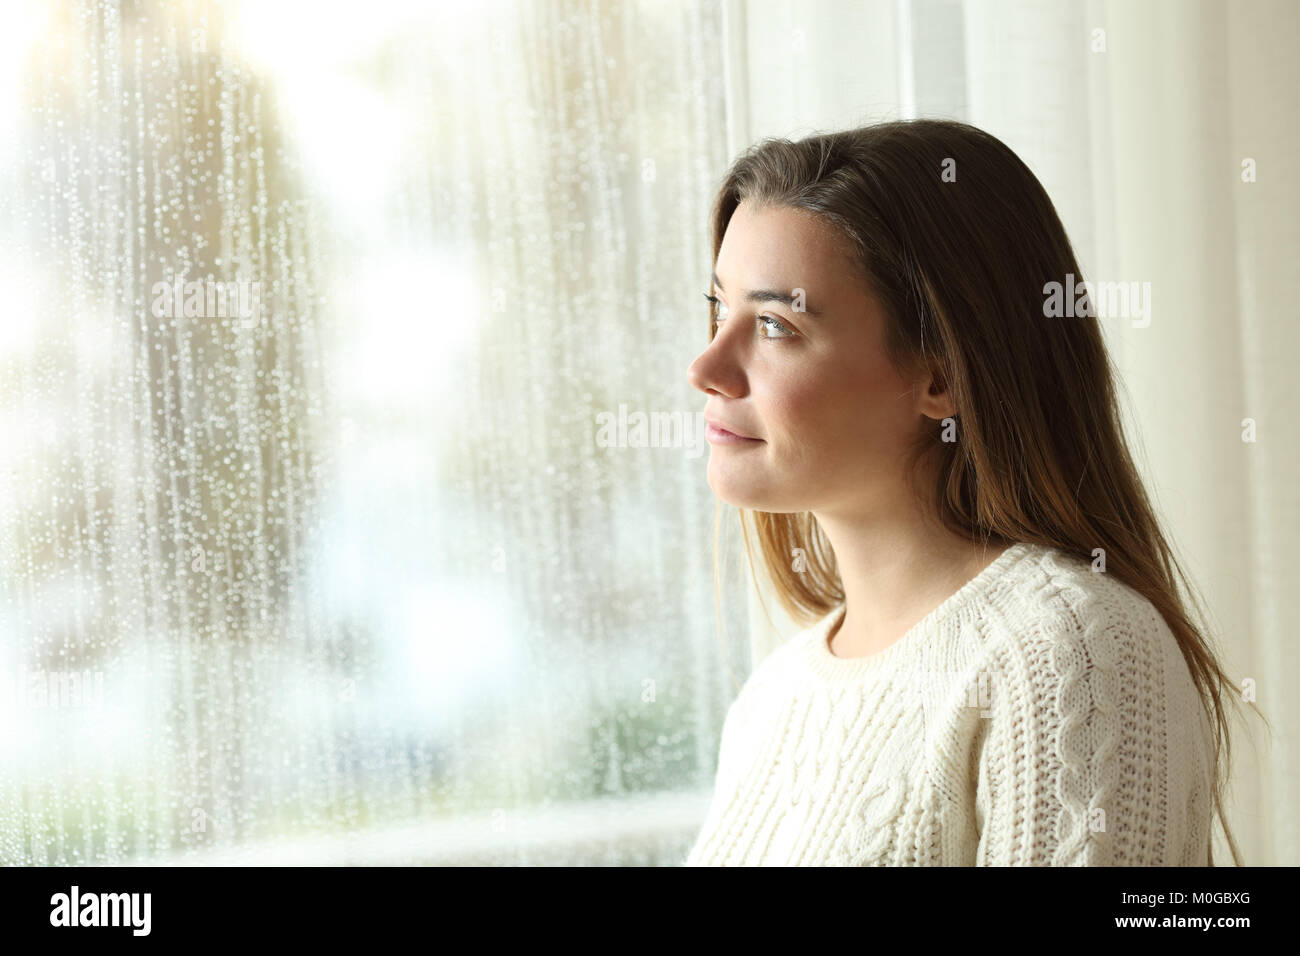 Pensive teenager looking through a window in a rainy day at home Stock Photo